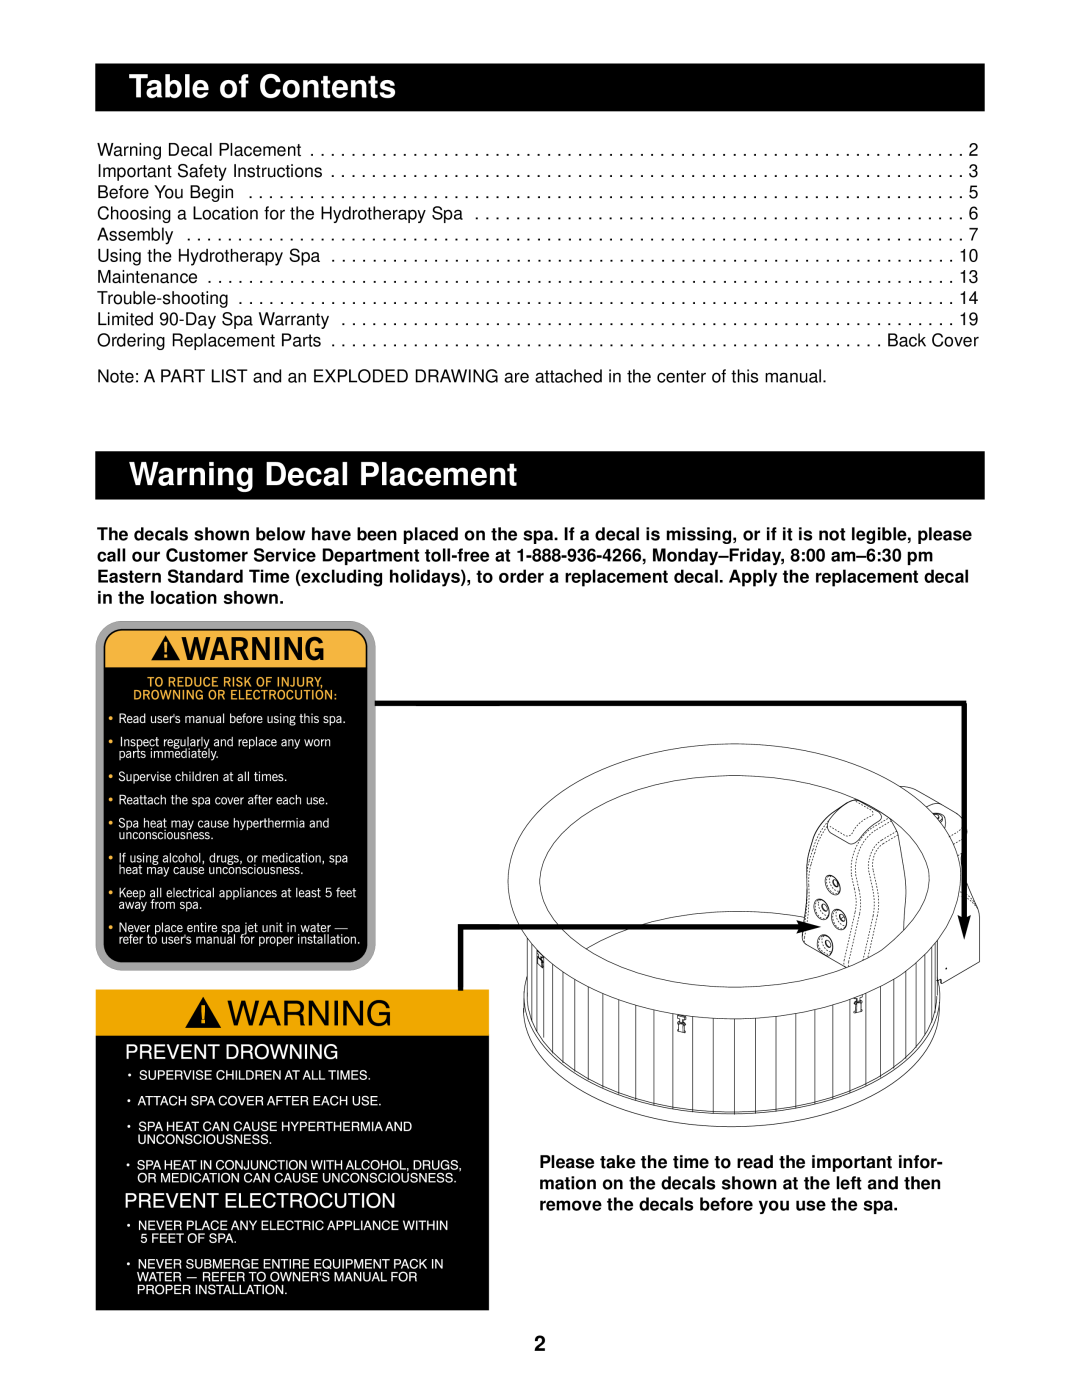 Image 831.10815 Table of Contents, Warning Decal Placement, in the location shown, Safety Instructions, Begin, Maintenance 